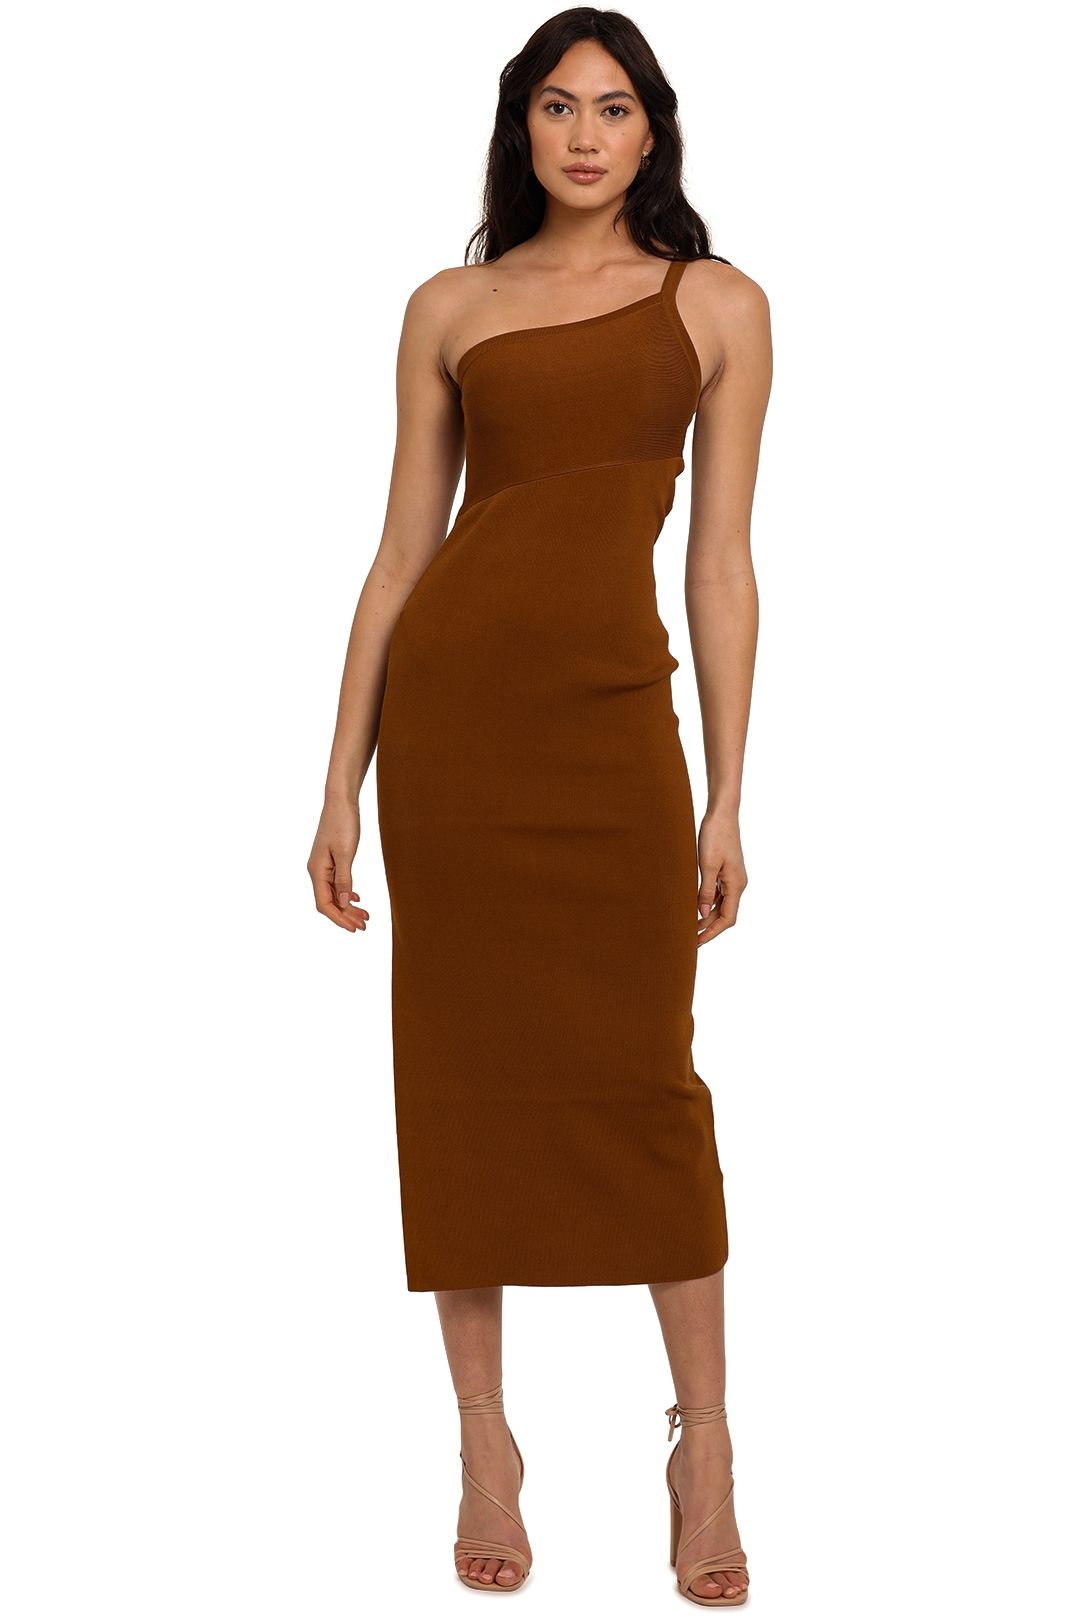 Significant Other Alicia Knit Dress Chocolate midi